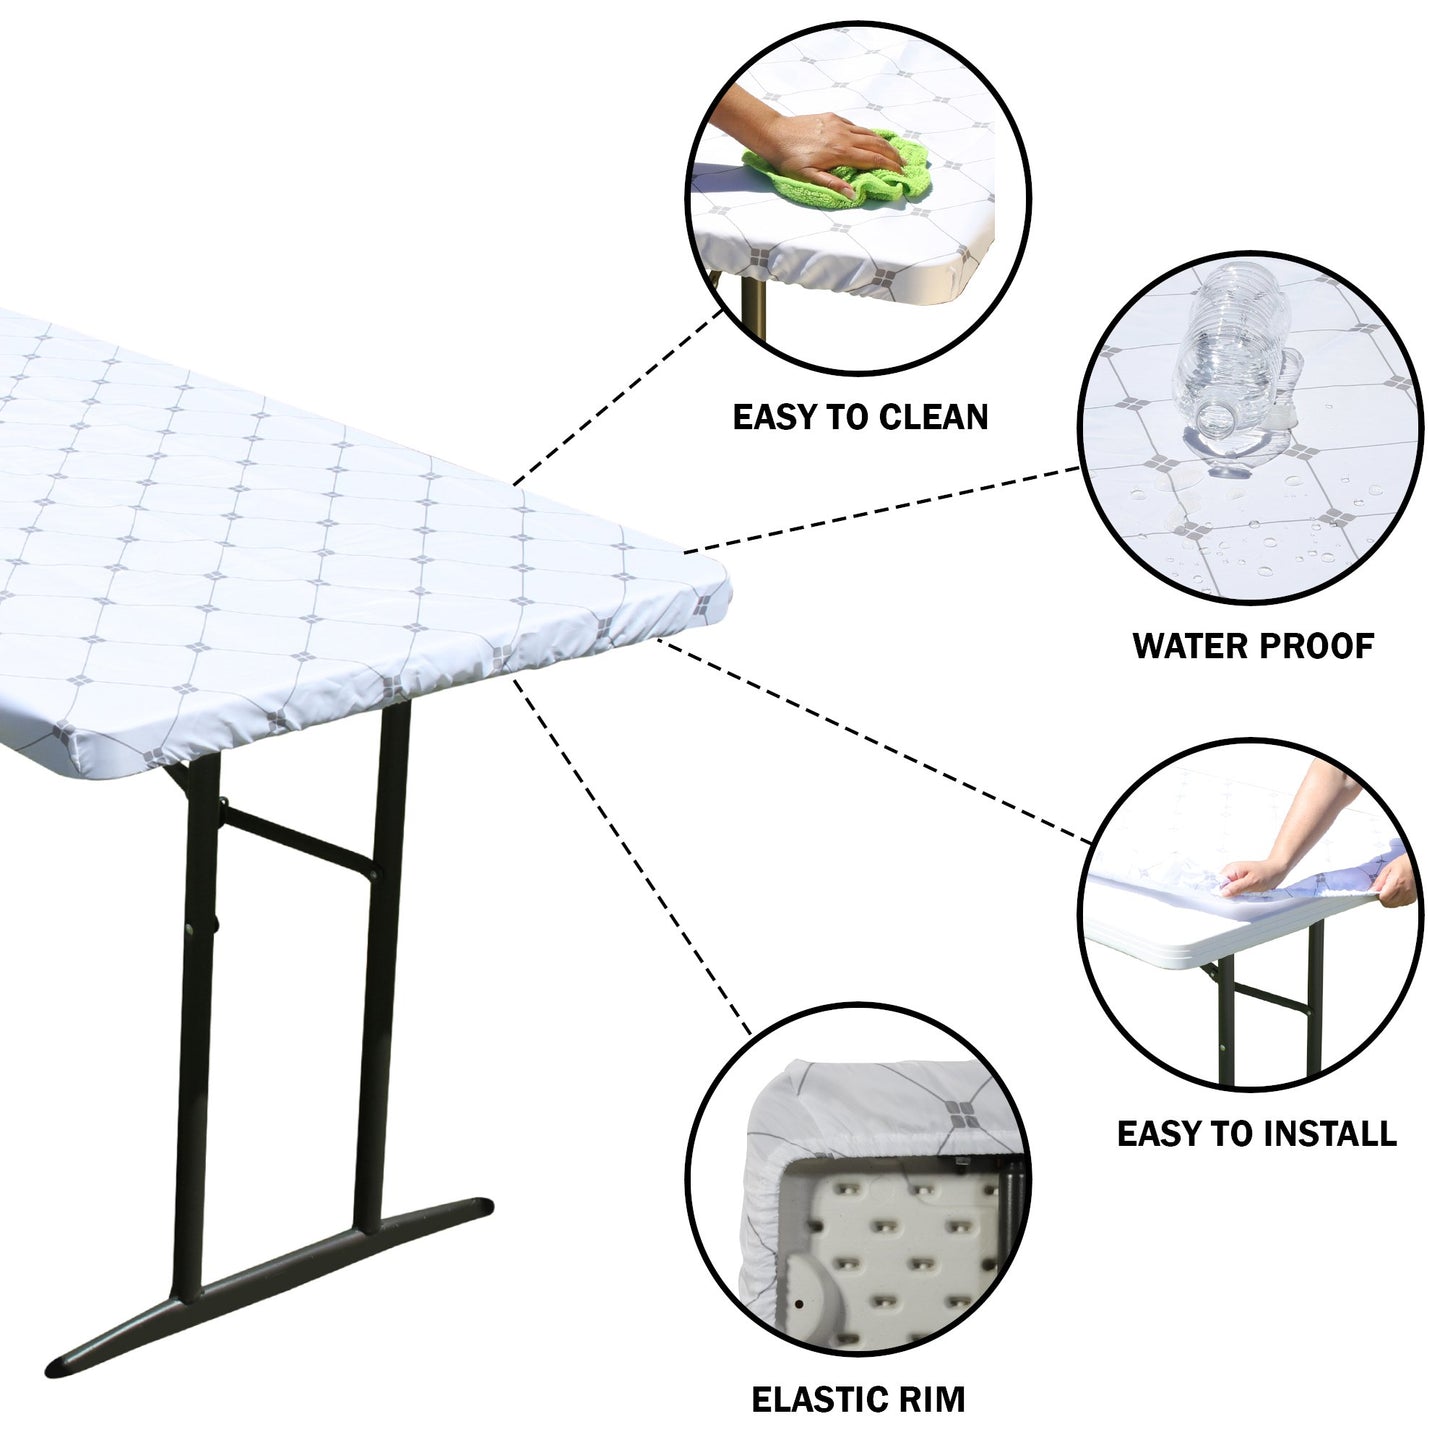 TableCloth PLUS 72" Diamonds Polyester Tablecloth for 6' Folding Tables is easy to clean, water proof, easy to install, and has an elastic rim